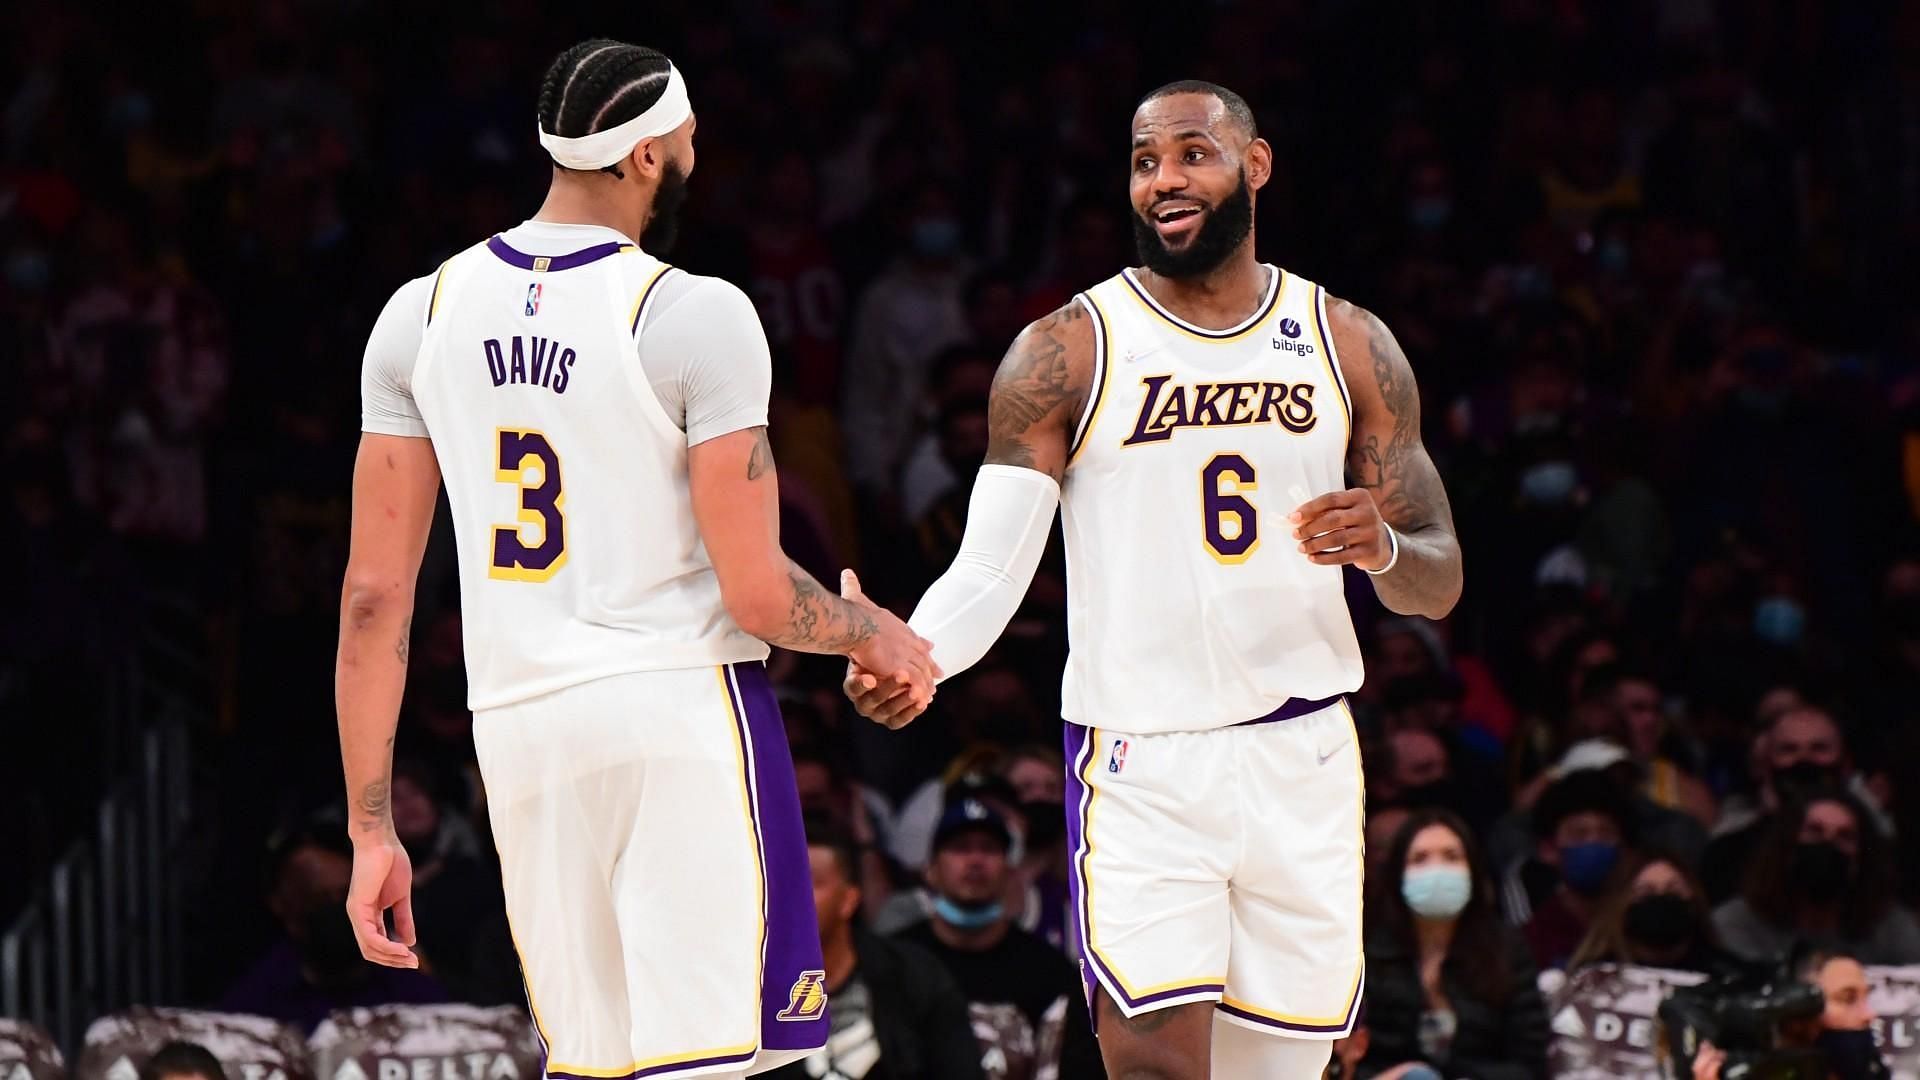 The LA Lakers will try anything to get more consistency out of their lineups, including putting LeBron James at center. [Photo: Sporting News]